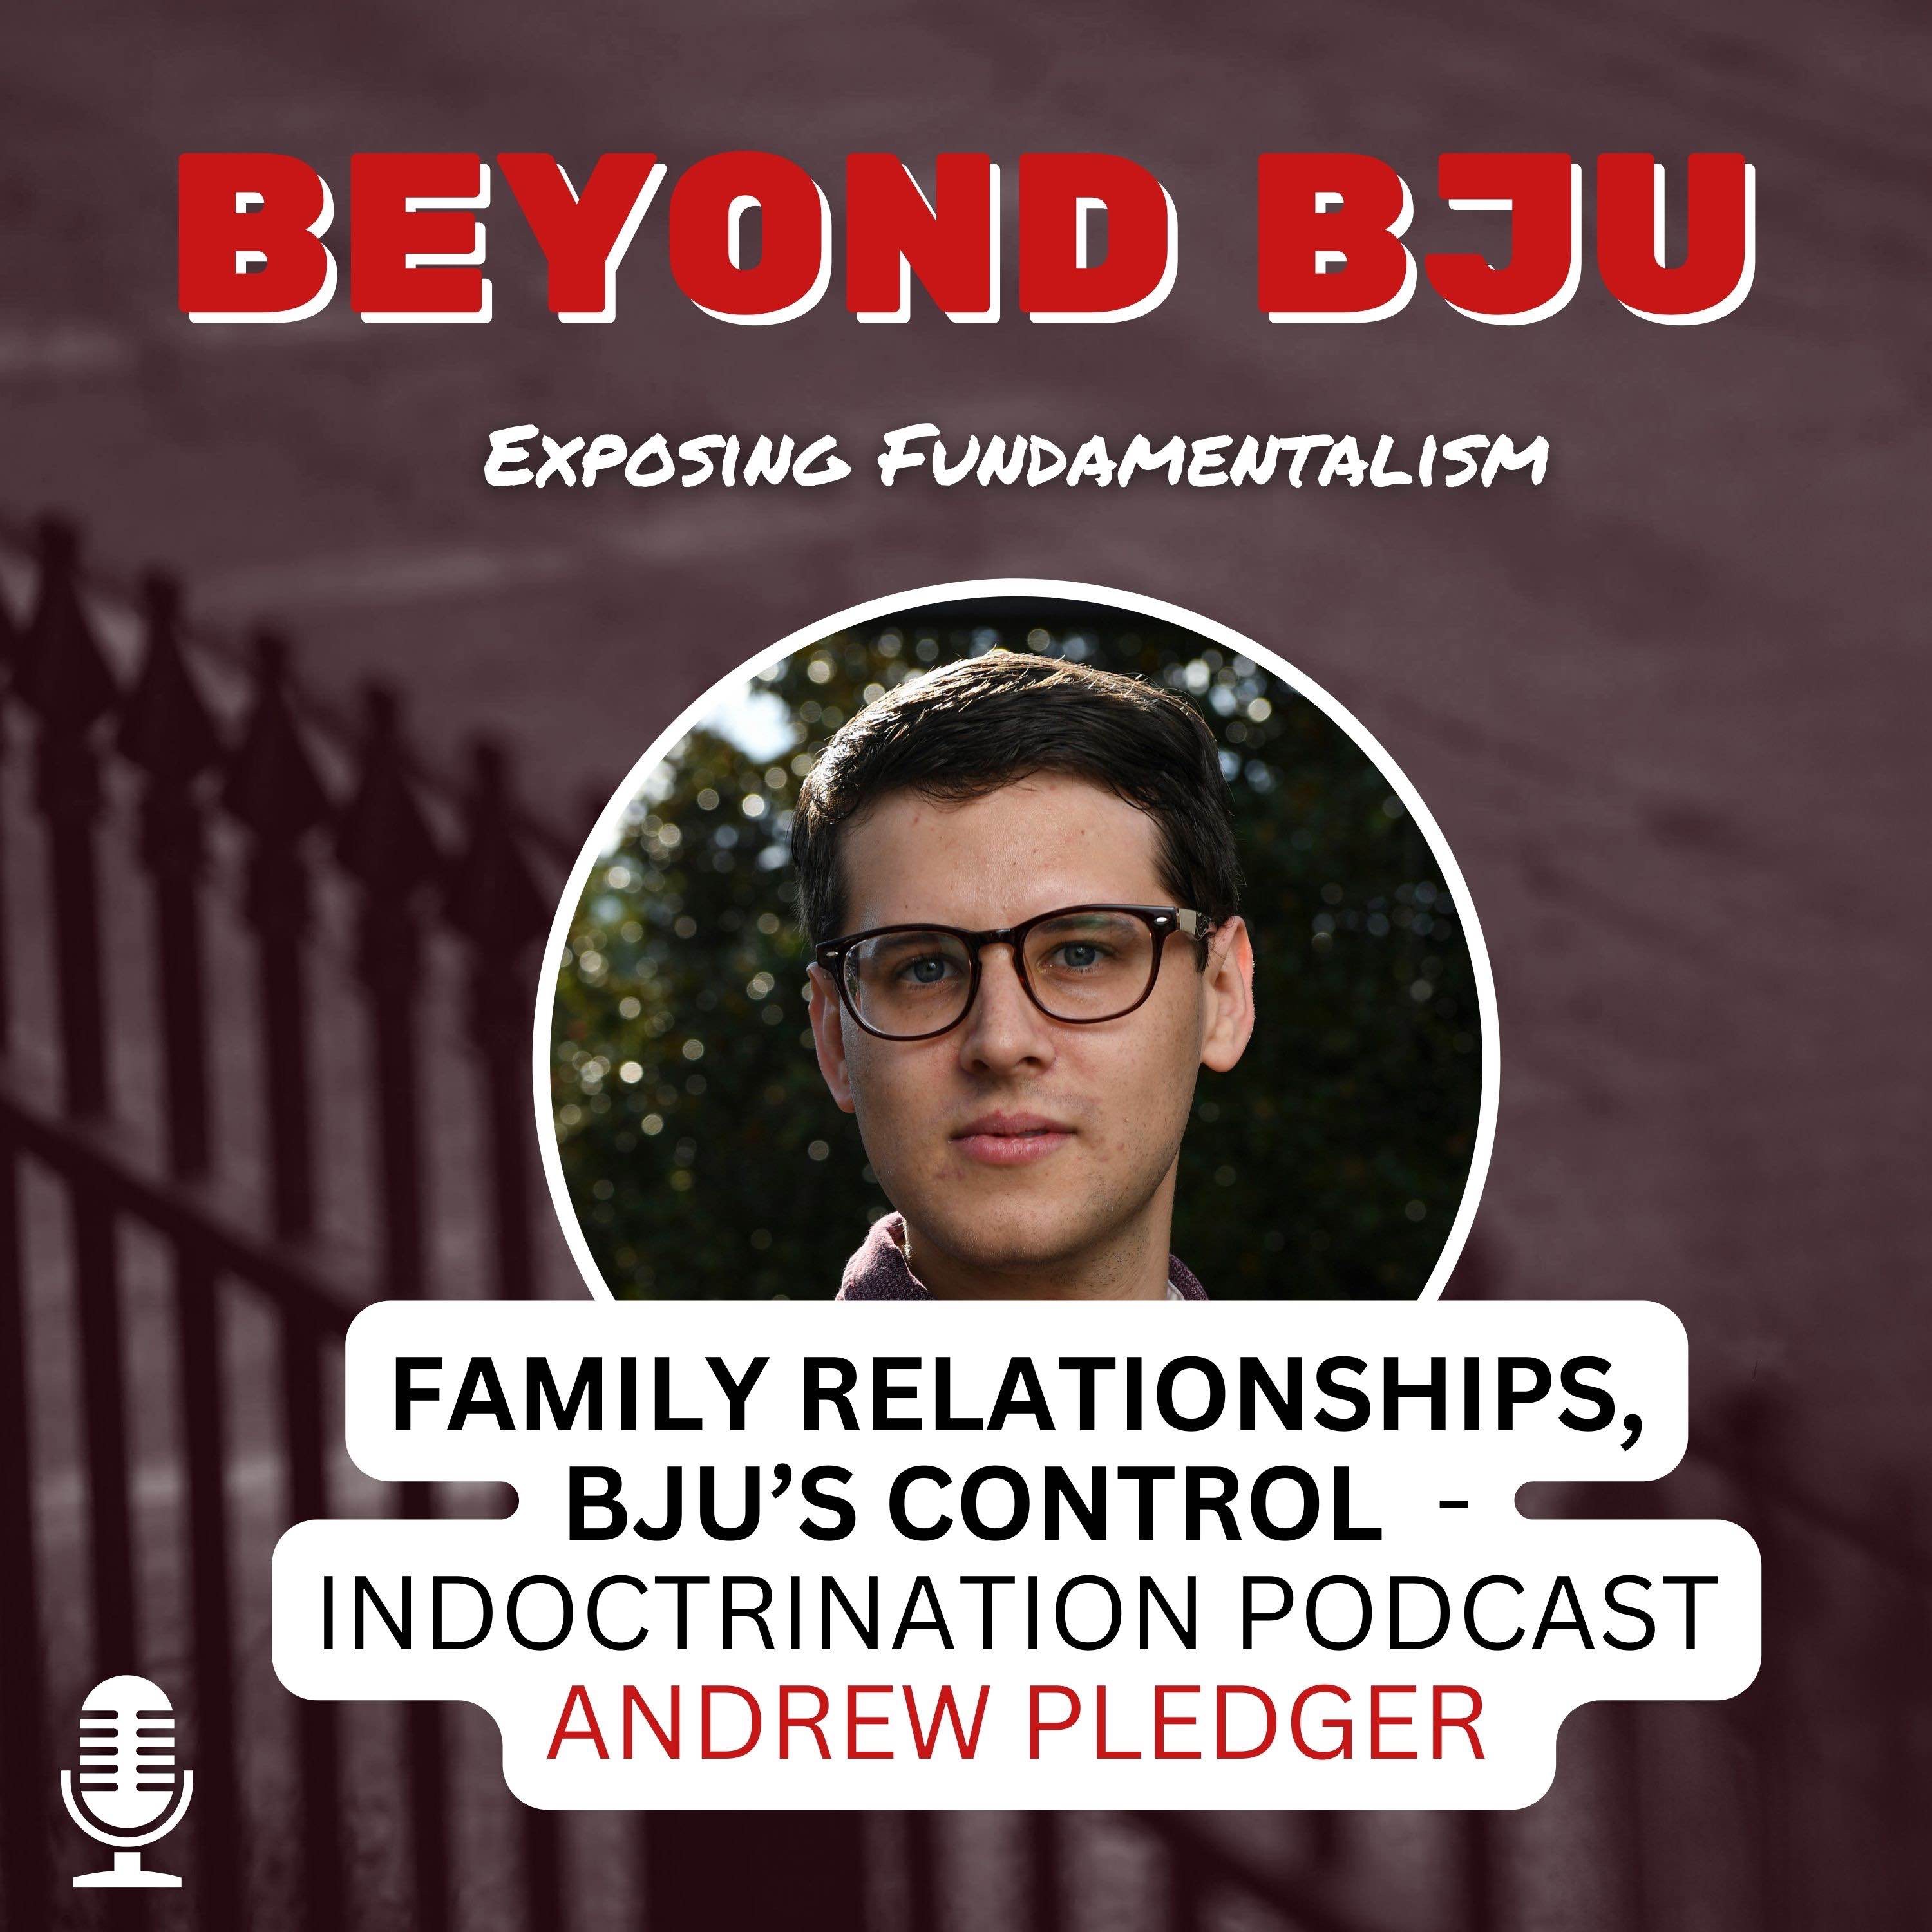 Ep. 6 - Family Relationships, BJU’s Control - Andrew Pledger - IndoctriNation Podcast